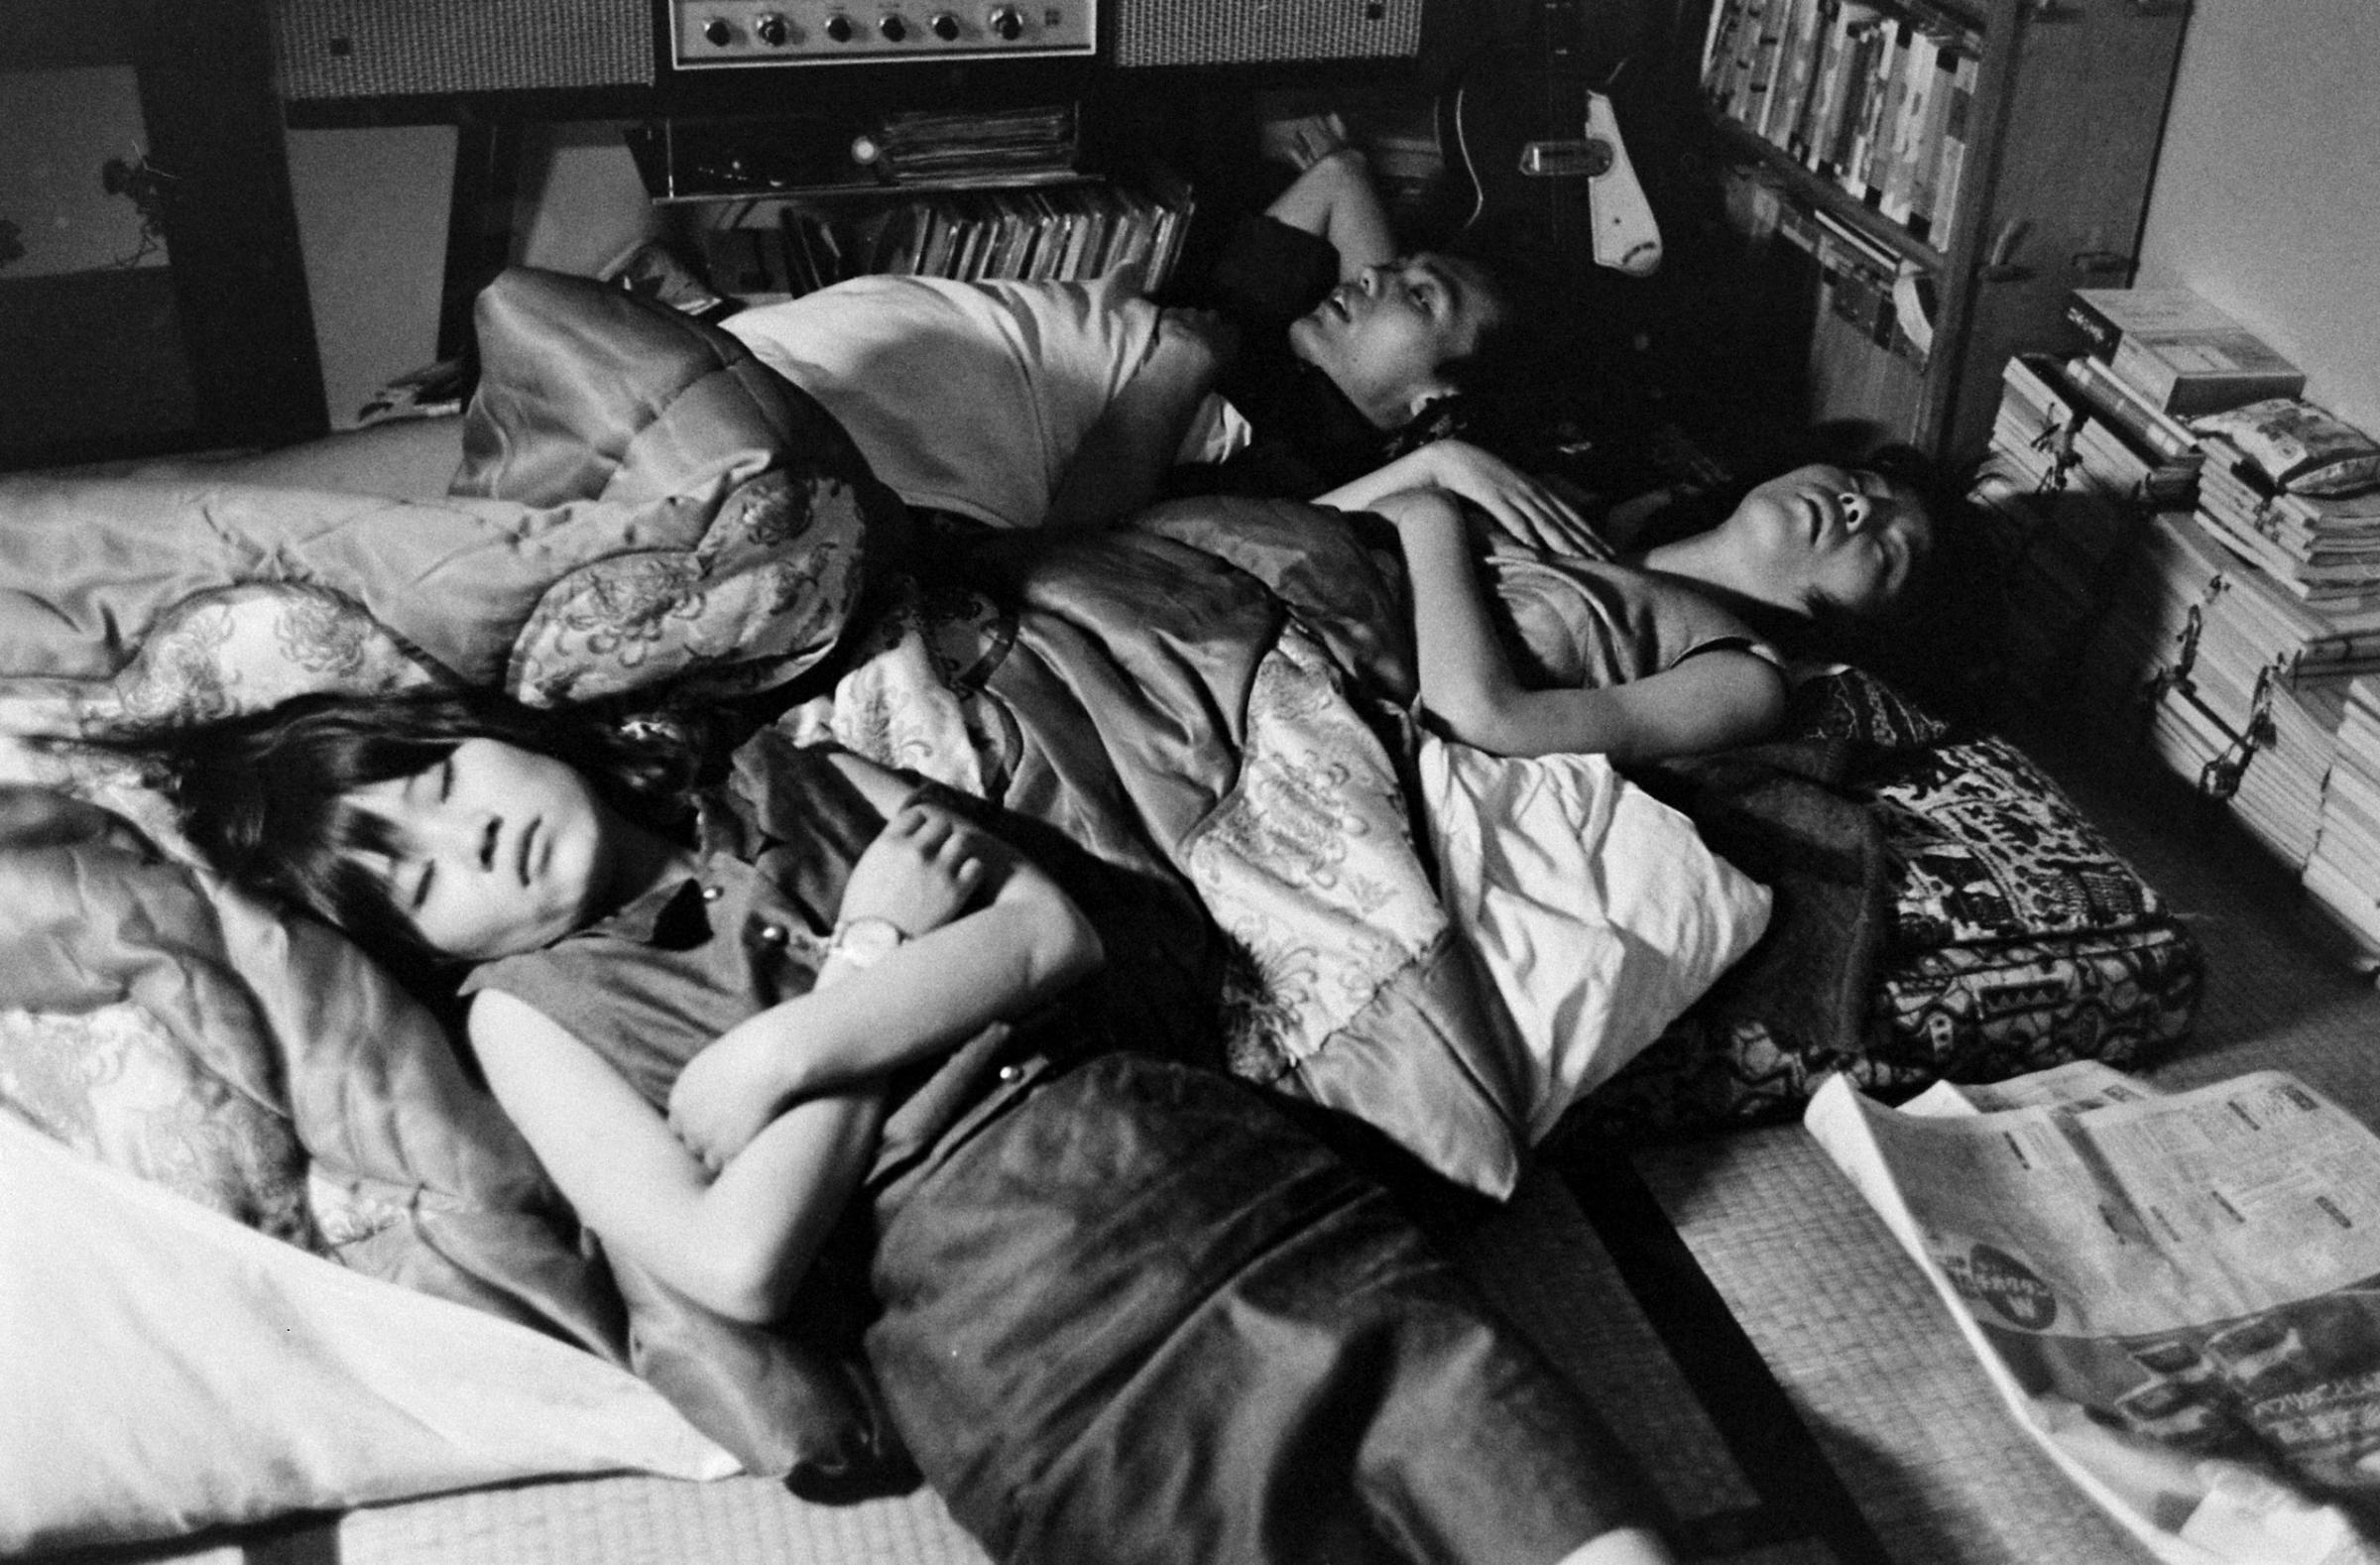 Yoko (left) ends a long night of clubbing by sleeping on a futon in a friend's room, Japan, 1964.